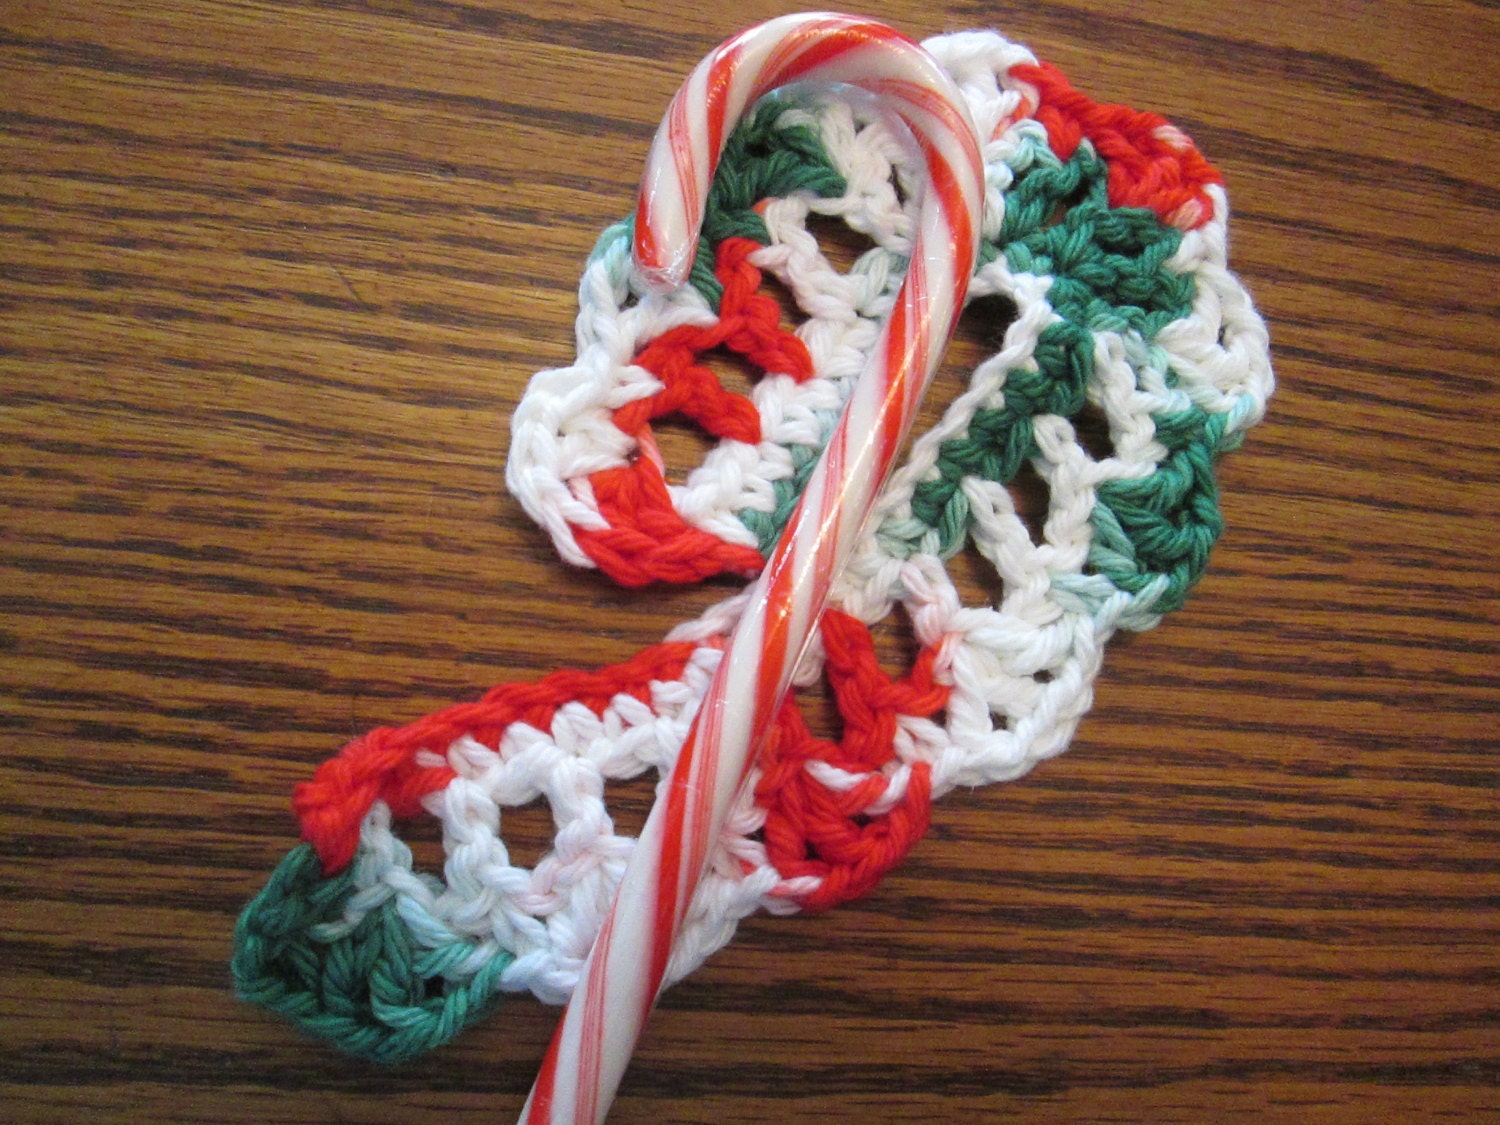 Crochet Candy Cane Cover Decoration Ornament